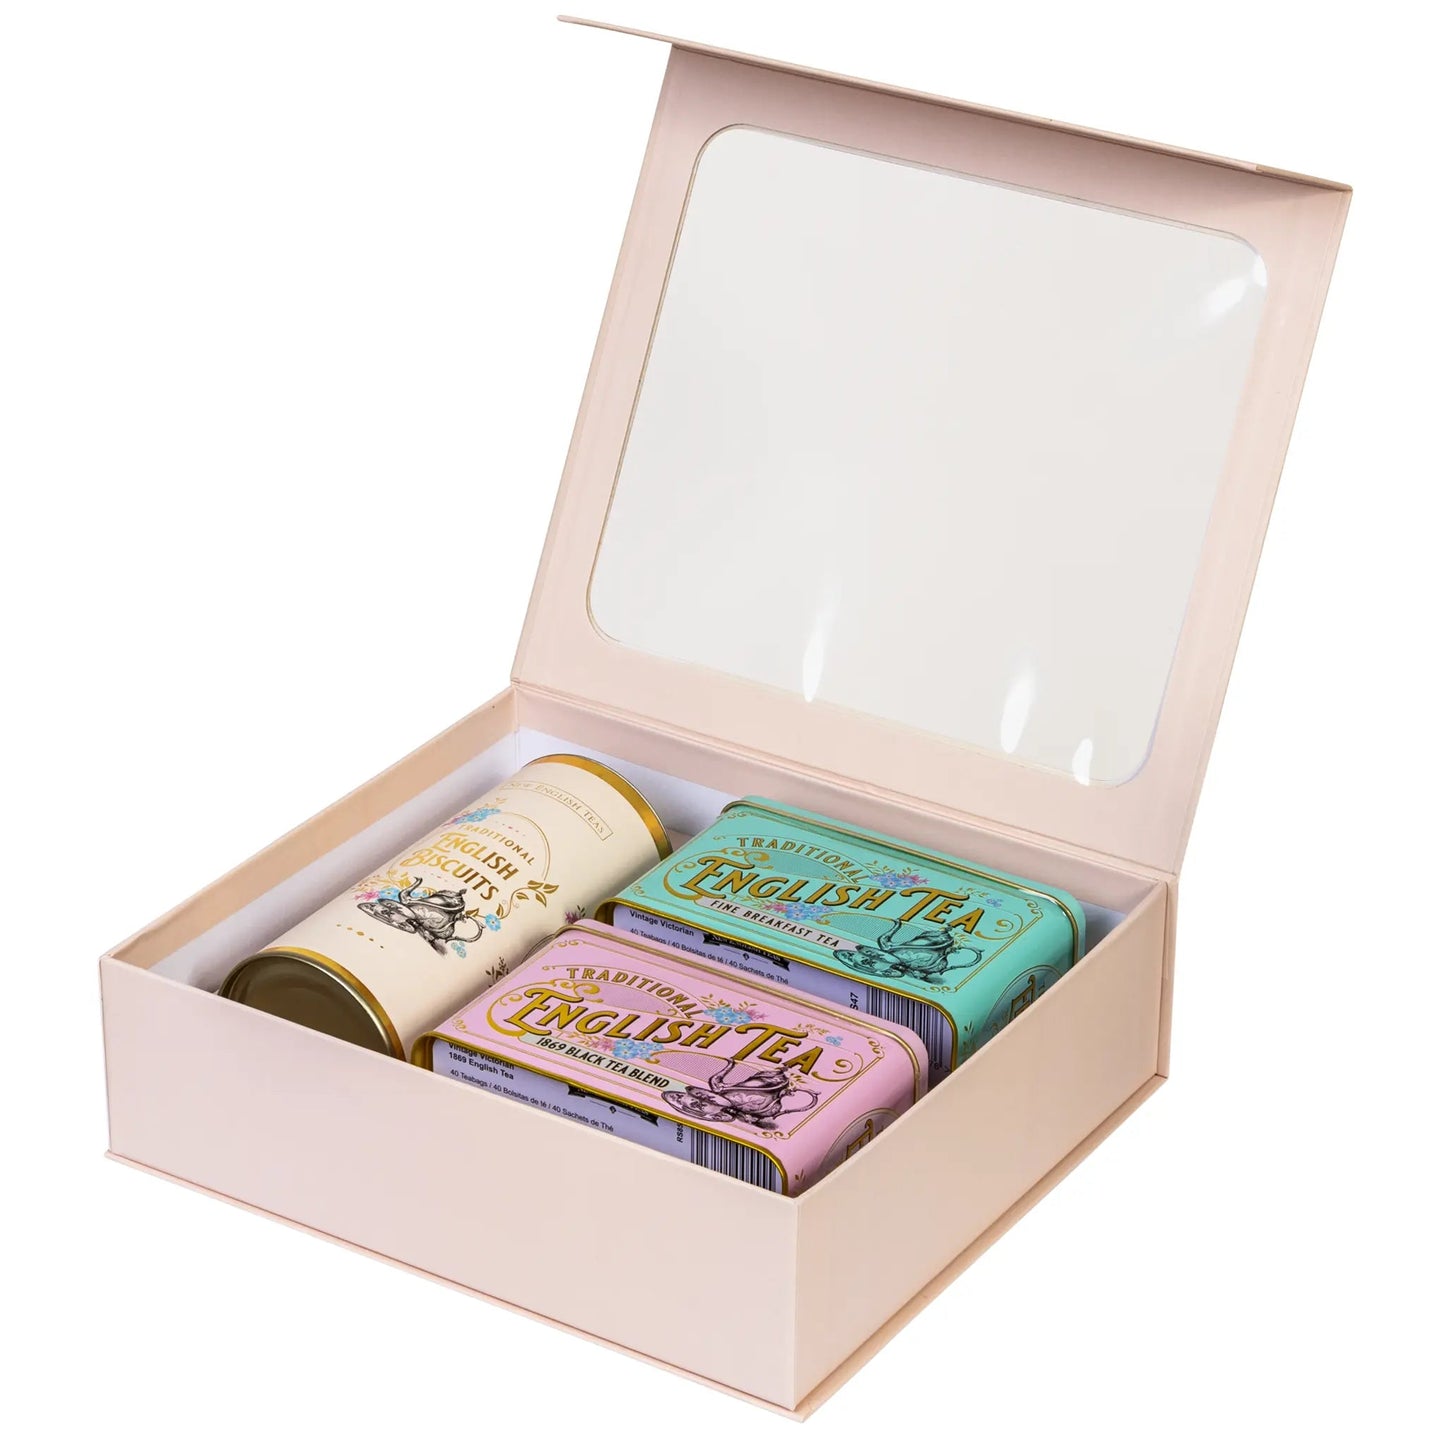 Luxury Tea & Biscuits Gift Box Gift Sets New English Teas 